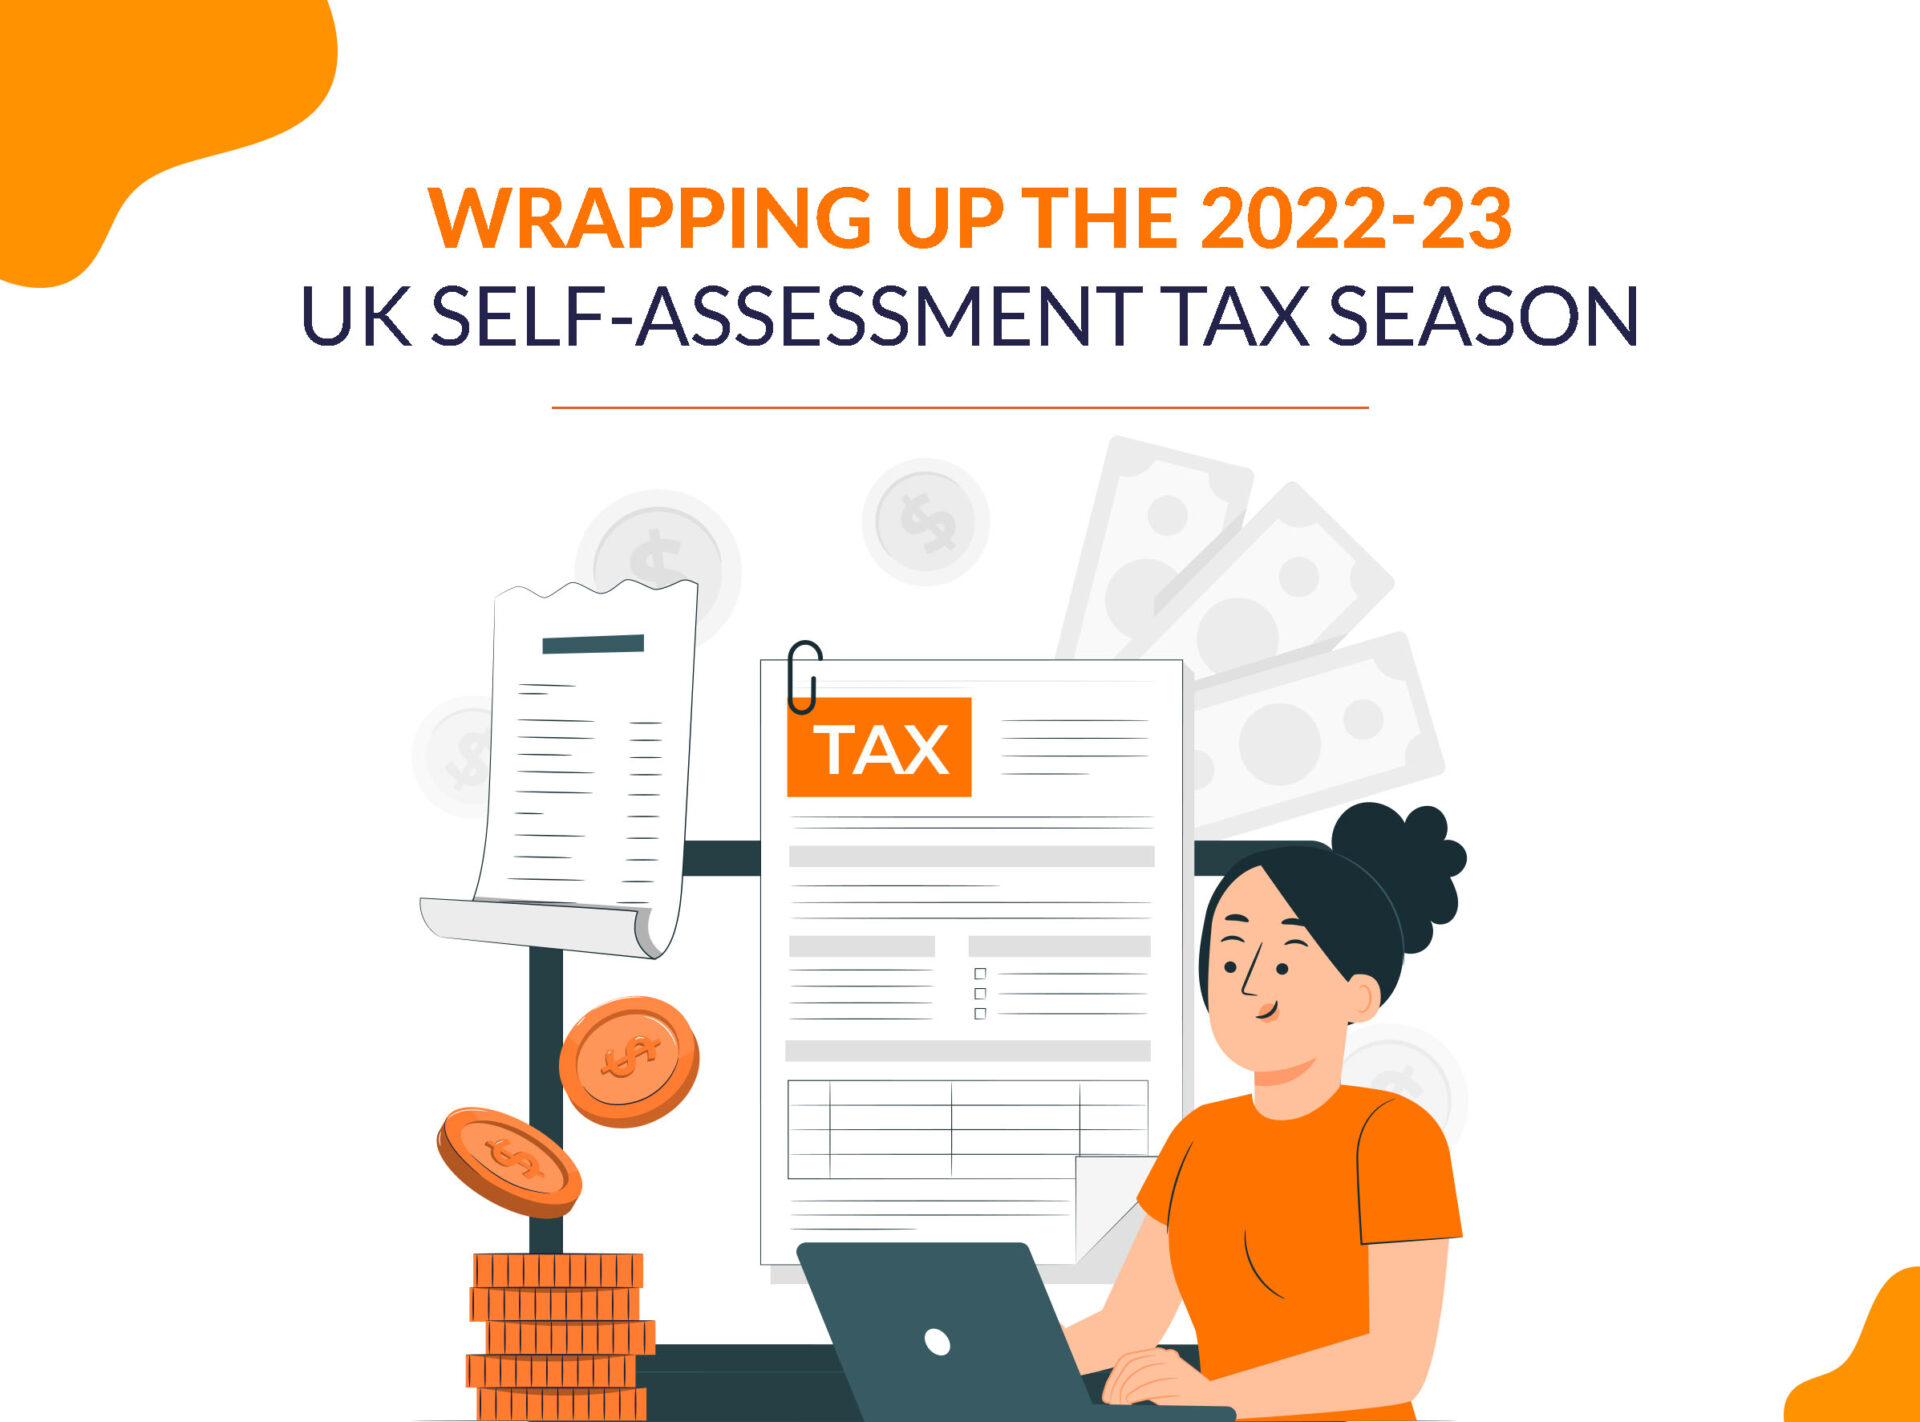 Wrapping Up the 2022-23 UK Self-Assessment Tax Season